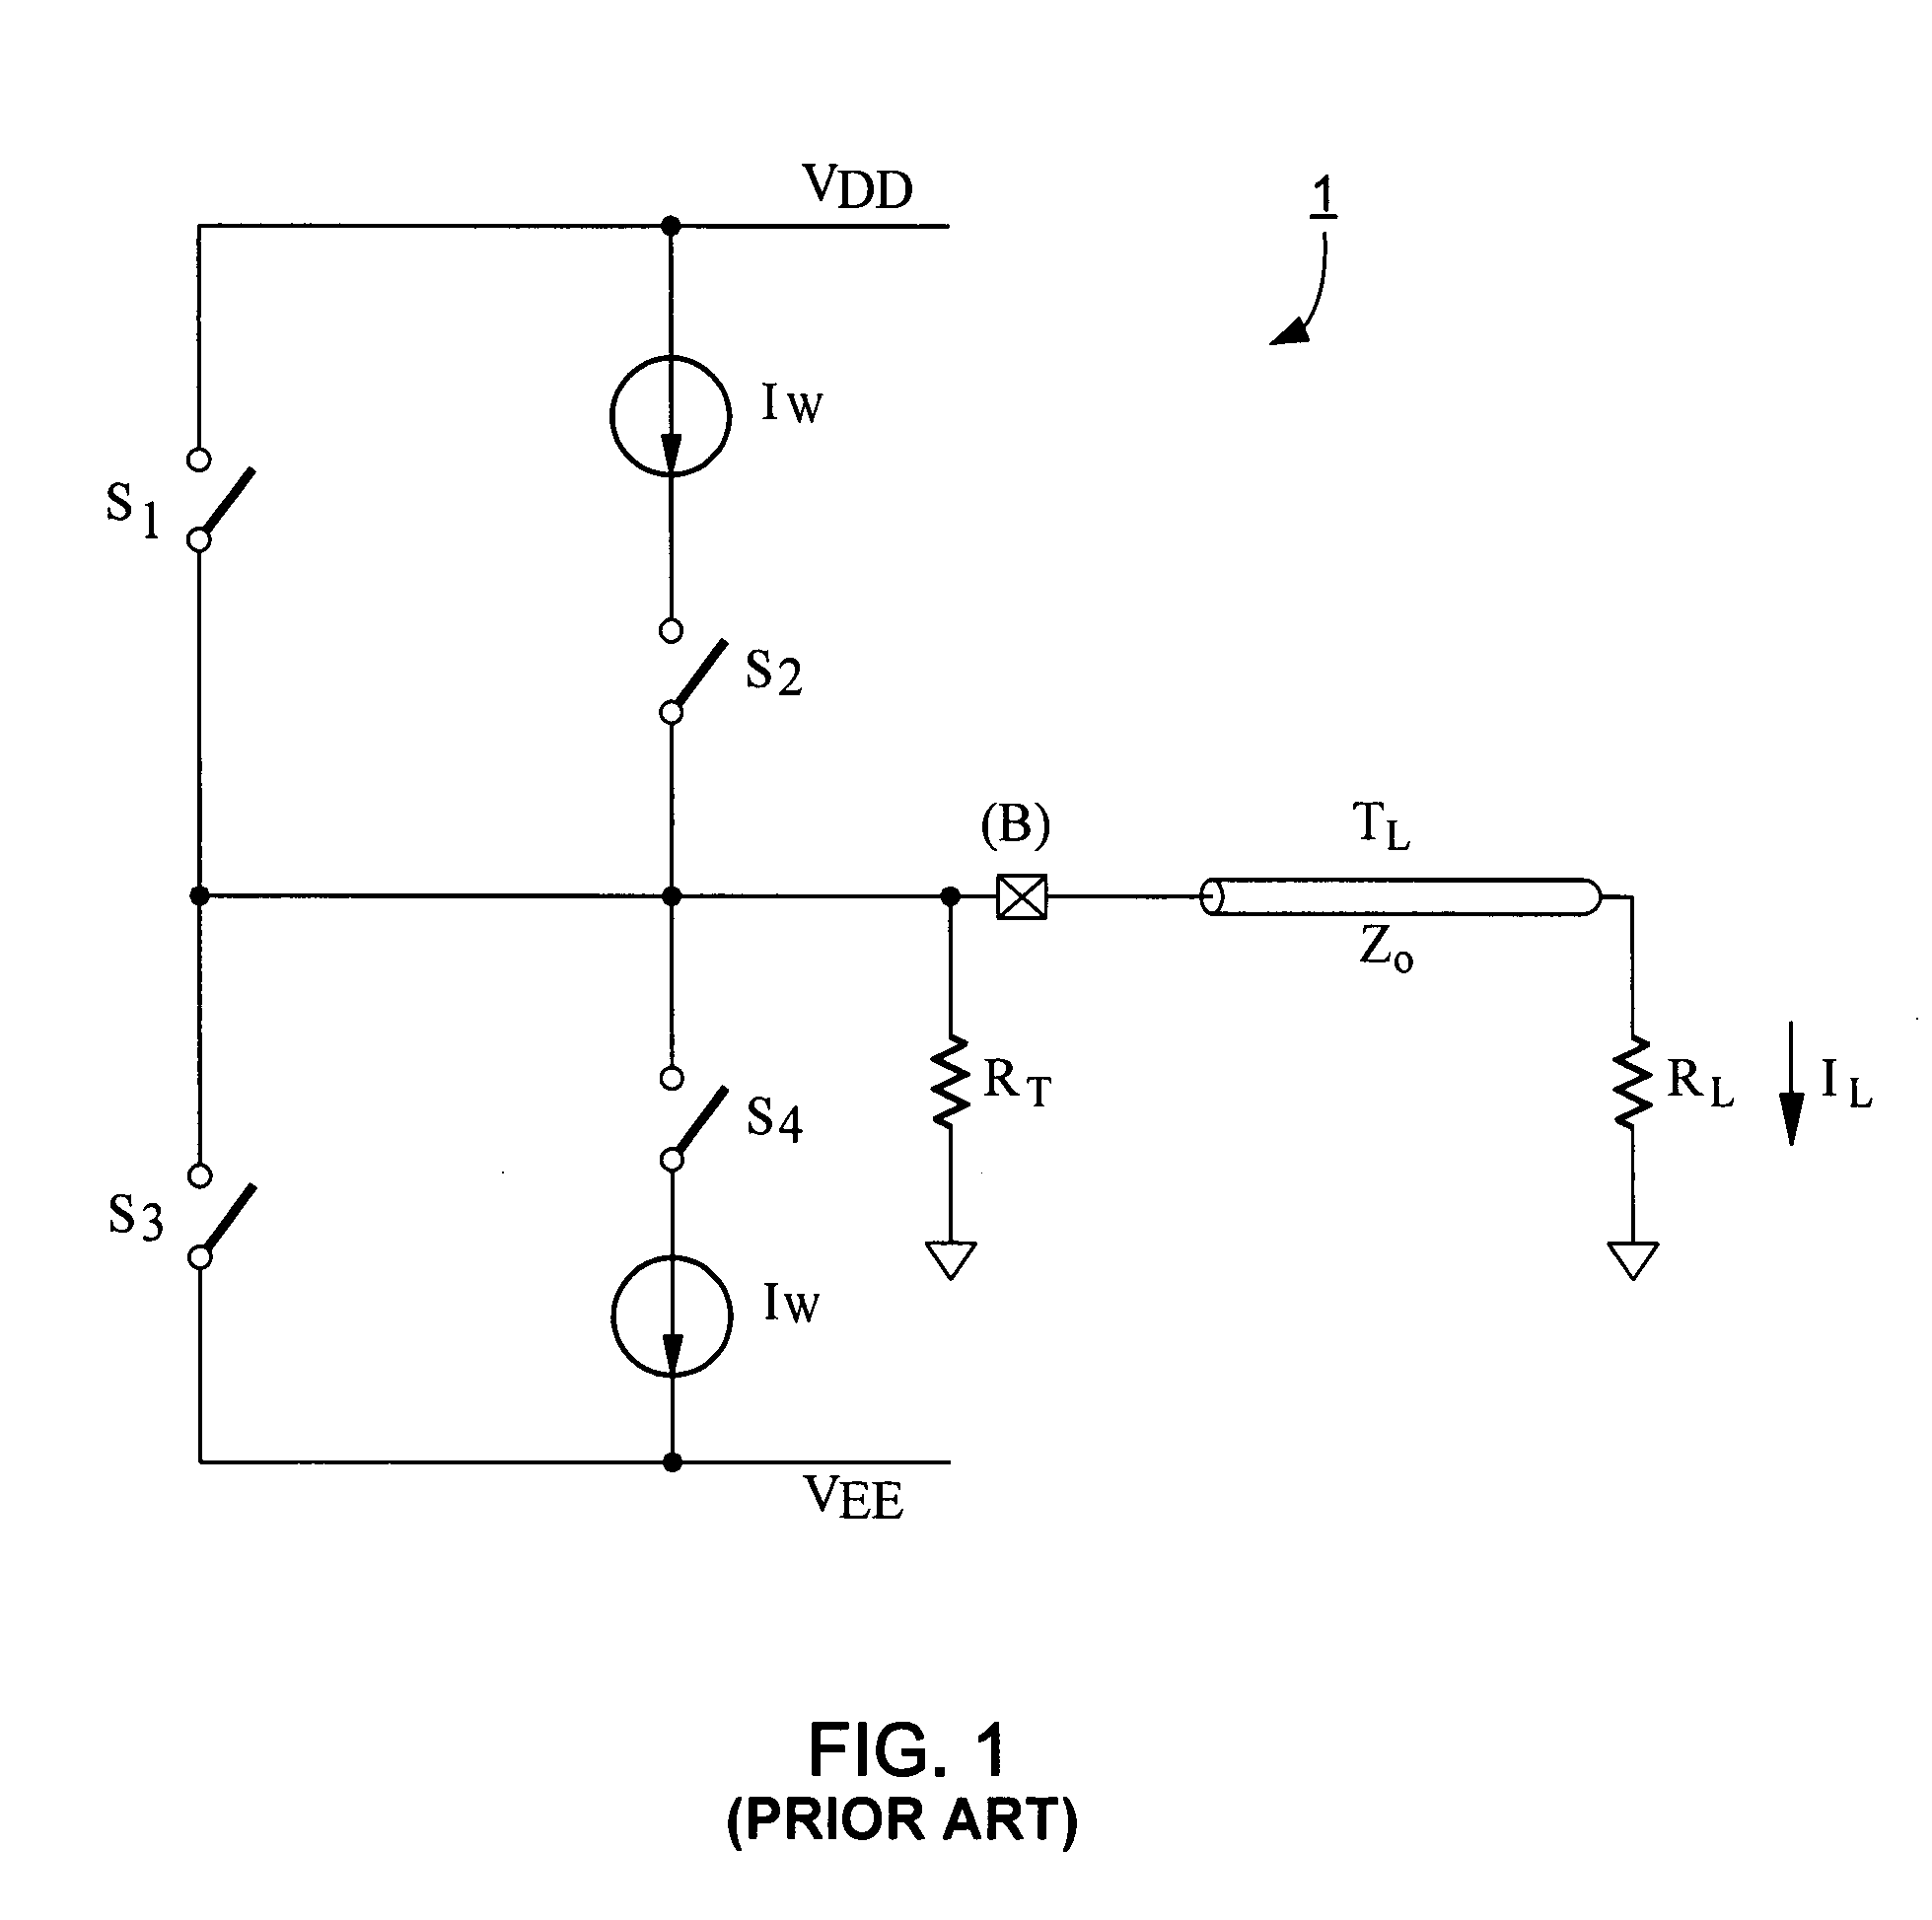 Boosted write driver for transmission line with reduction in parasitic effect of protection devices